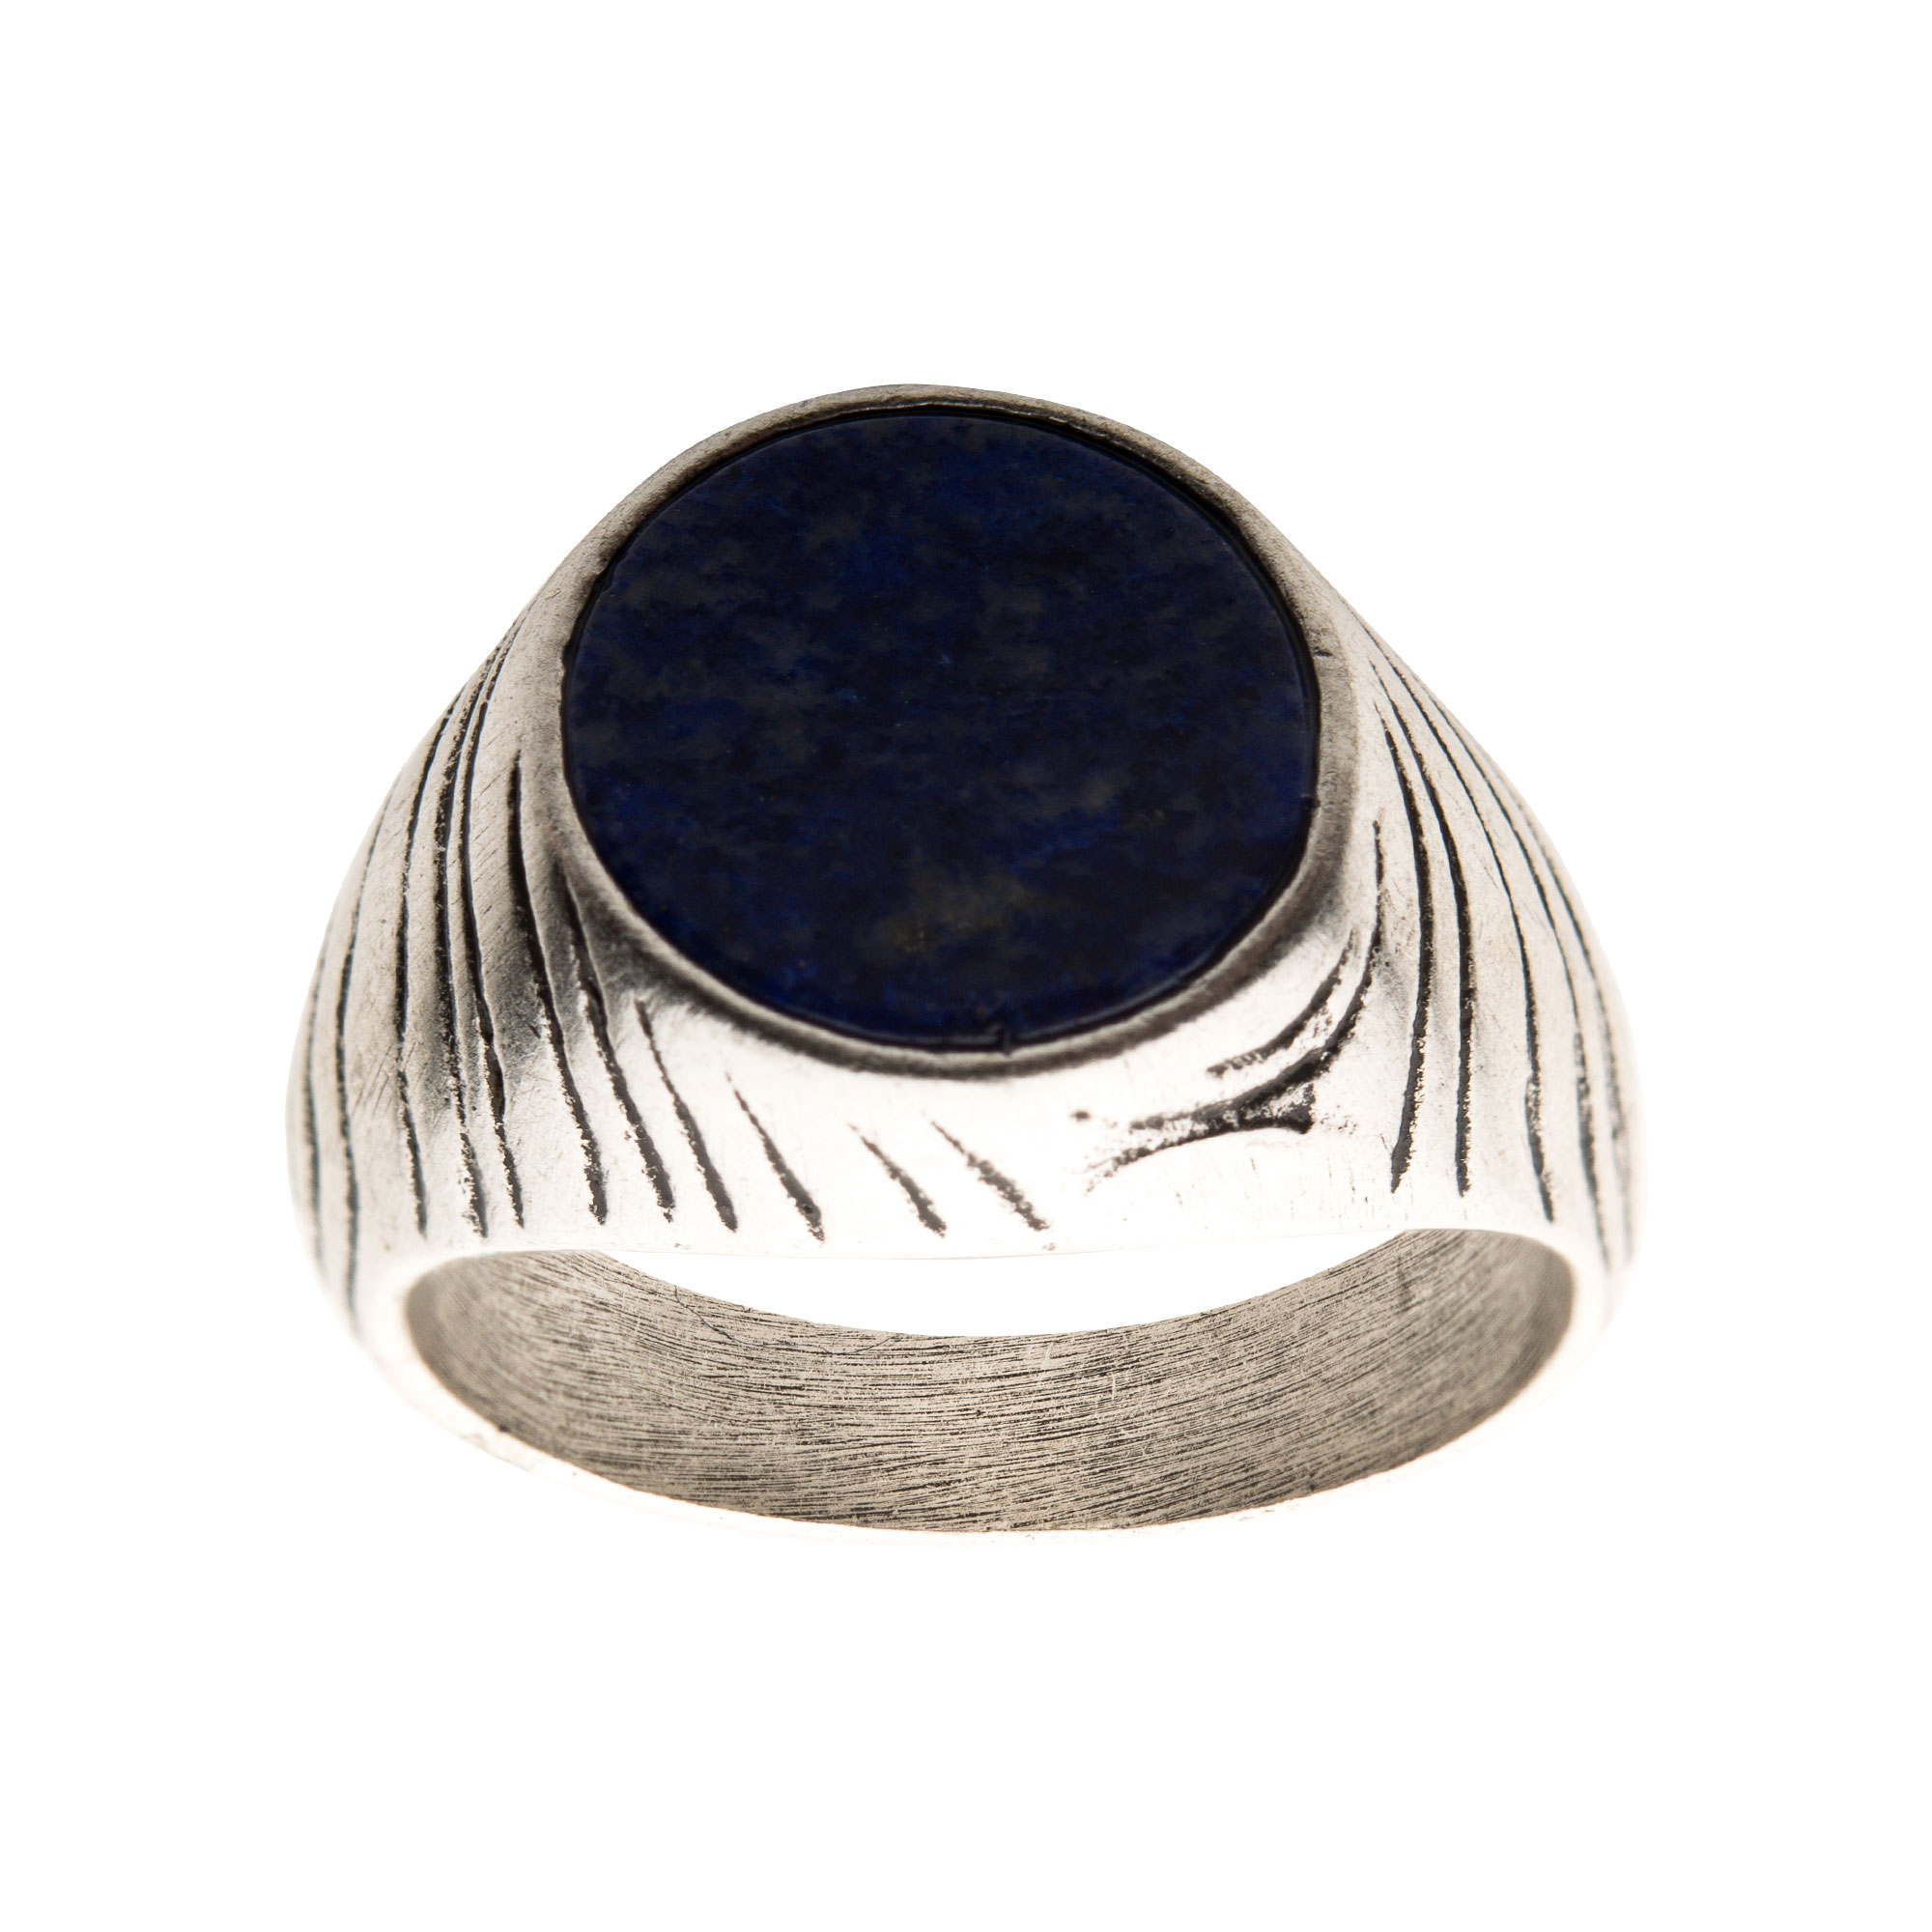 Stainless Steel Silver Plated with Lapis Stone Ring Image 2 Midtown Diamonds Reno, NV